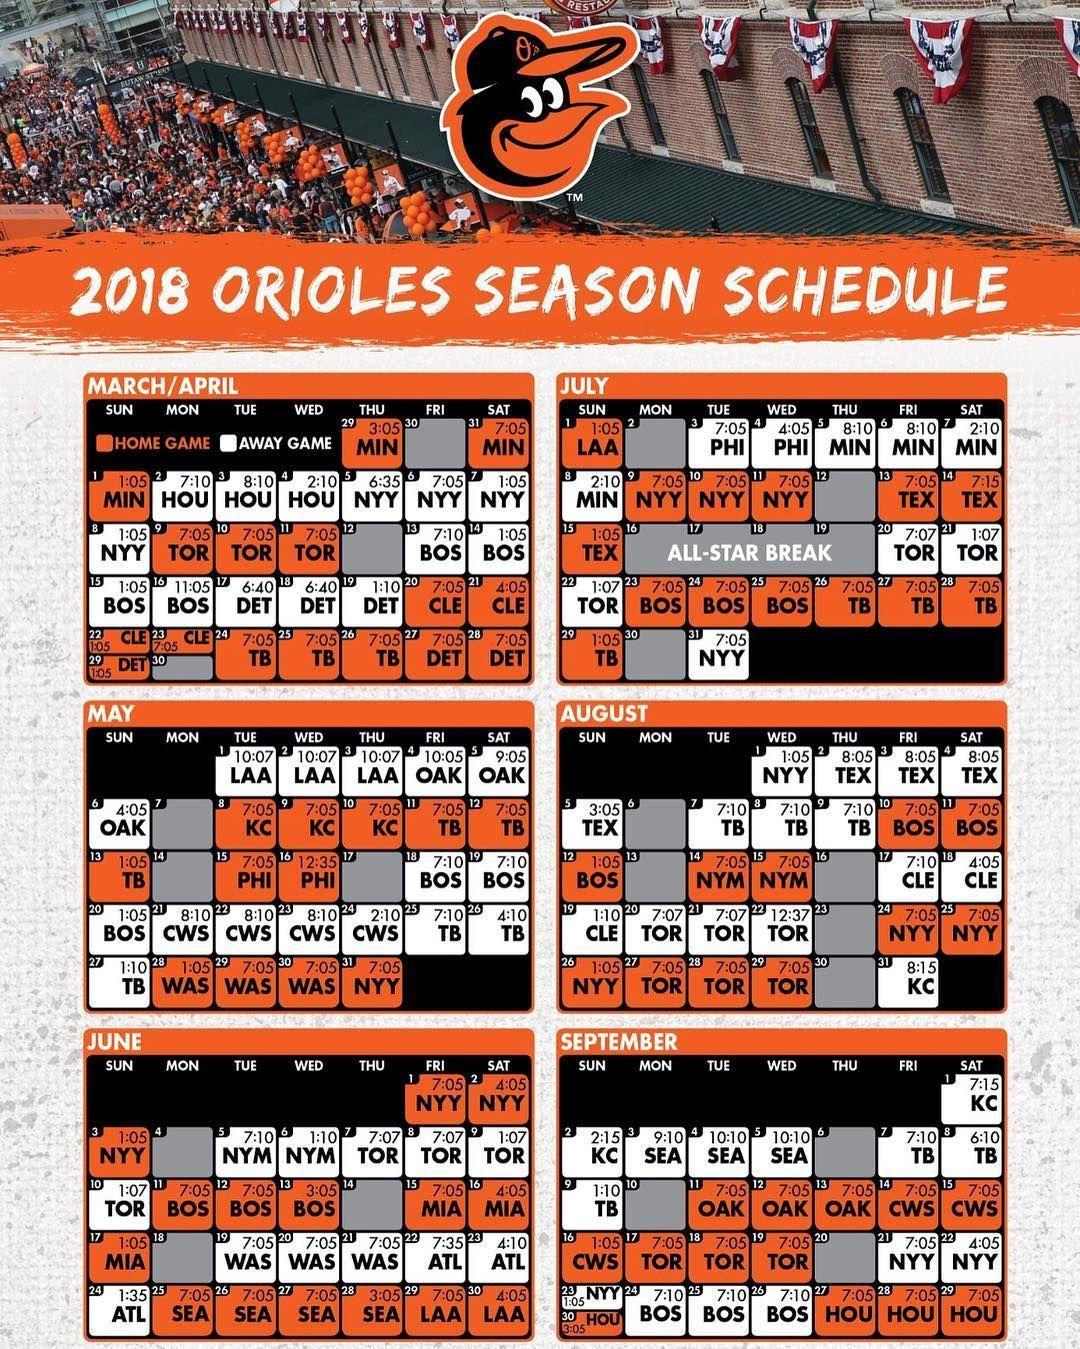 Heres the official 2018 Orioles schedule! Opening day is Thursday